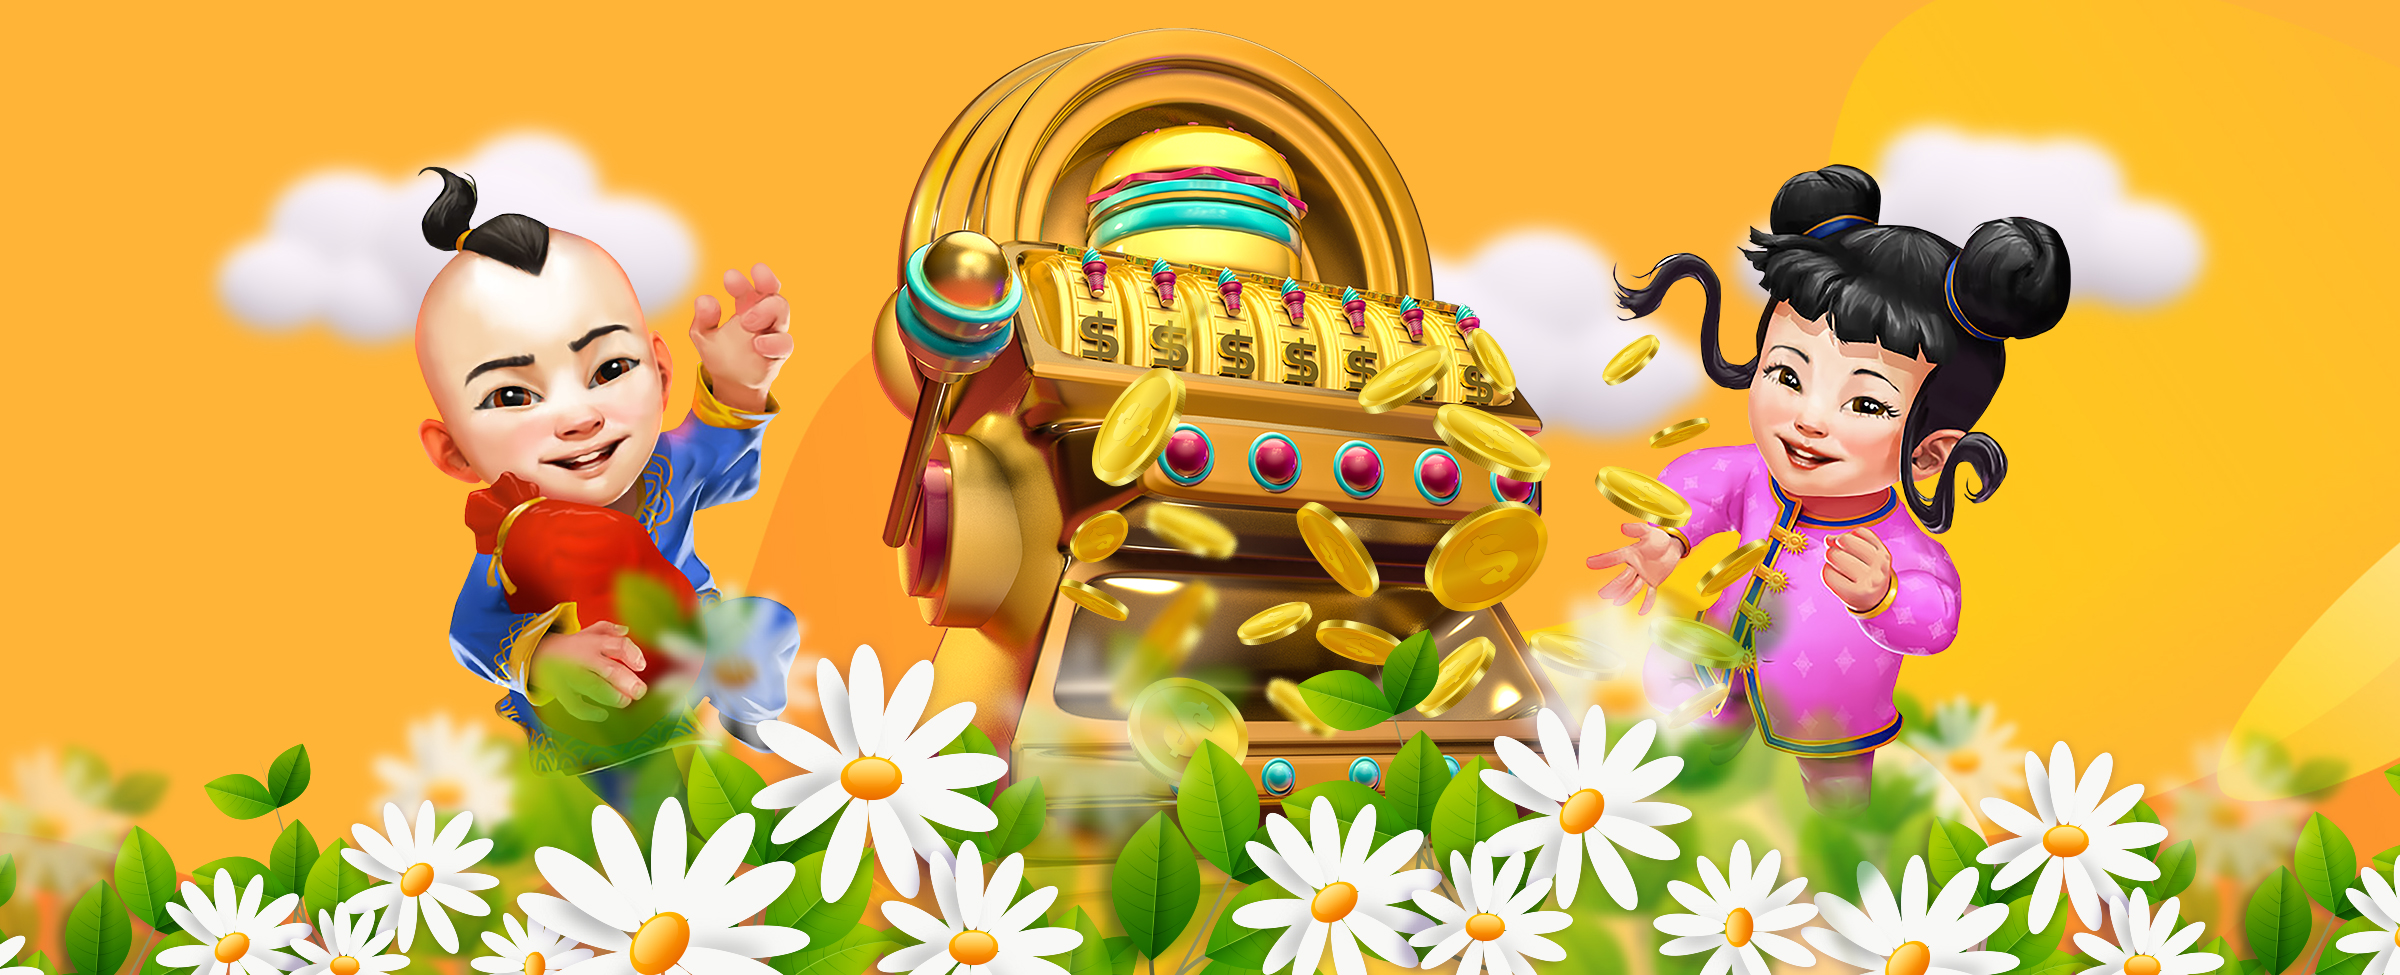 Spring is in full bloom, and to celebrate, SlotsLV has carefully put together a basket of fresh slots to liven up your day. Spring into these new slots today!